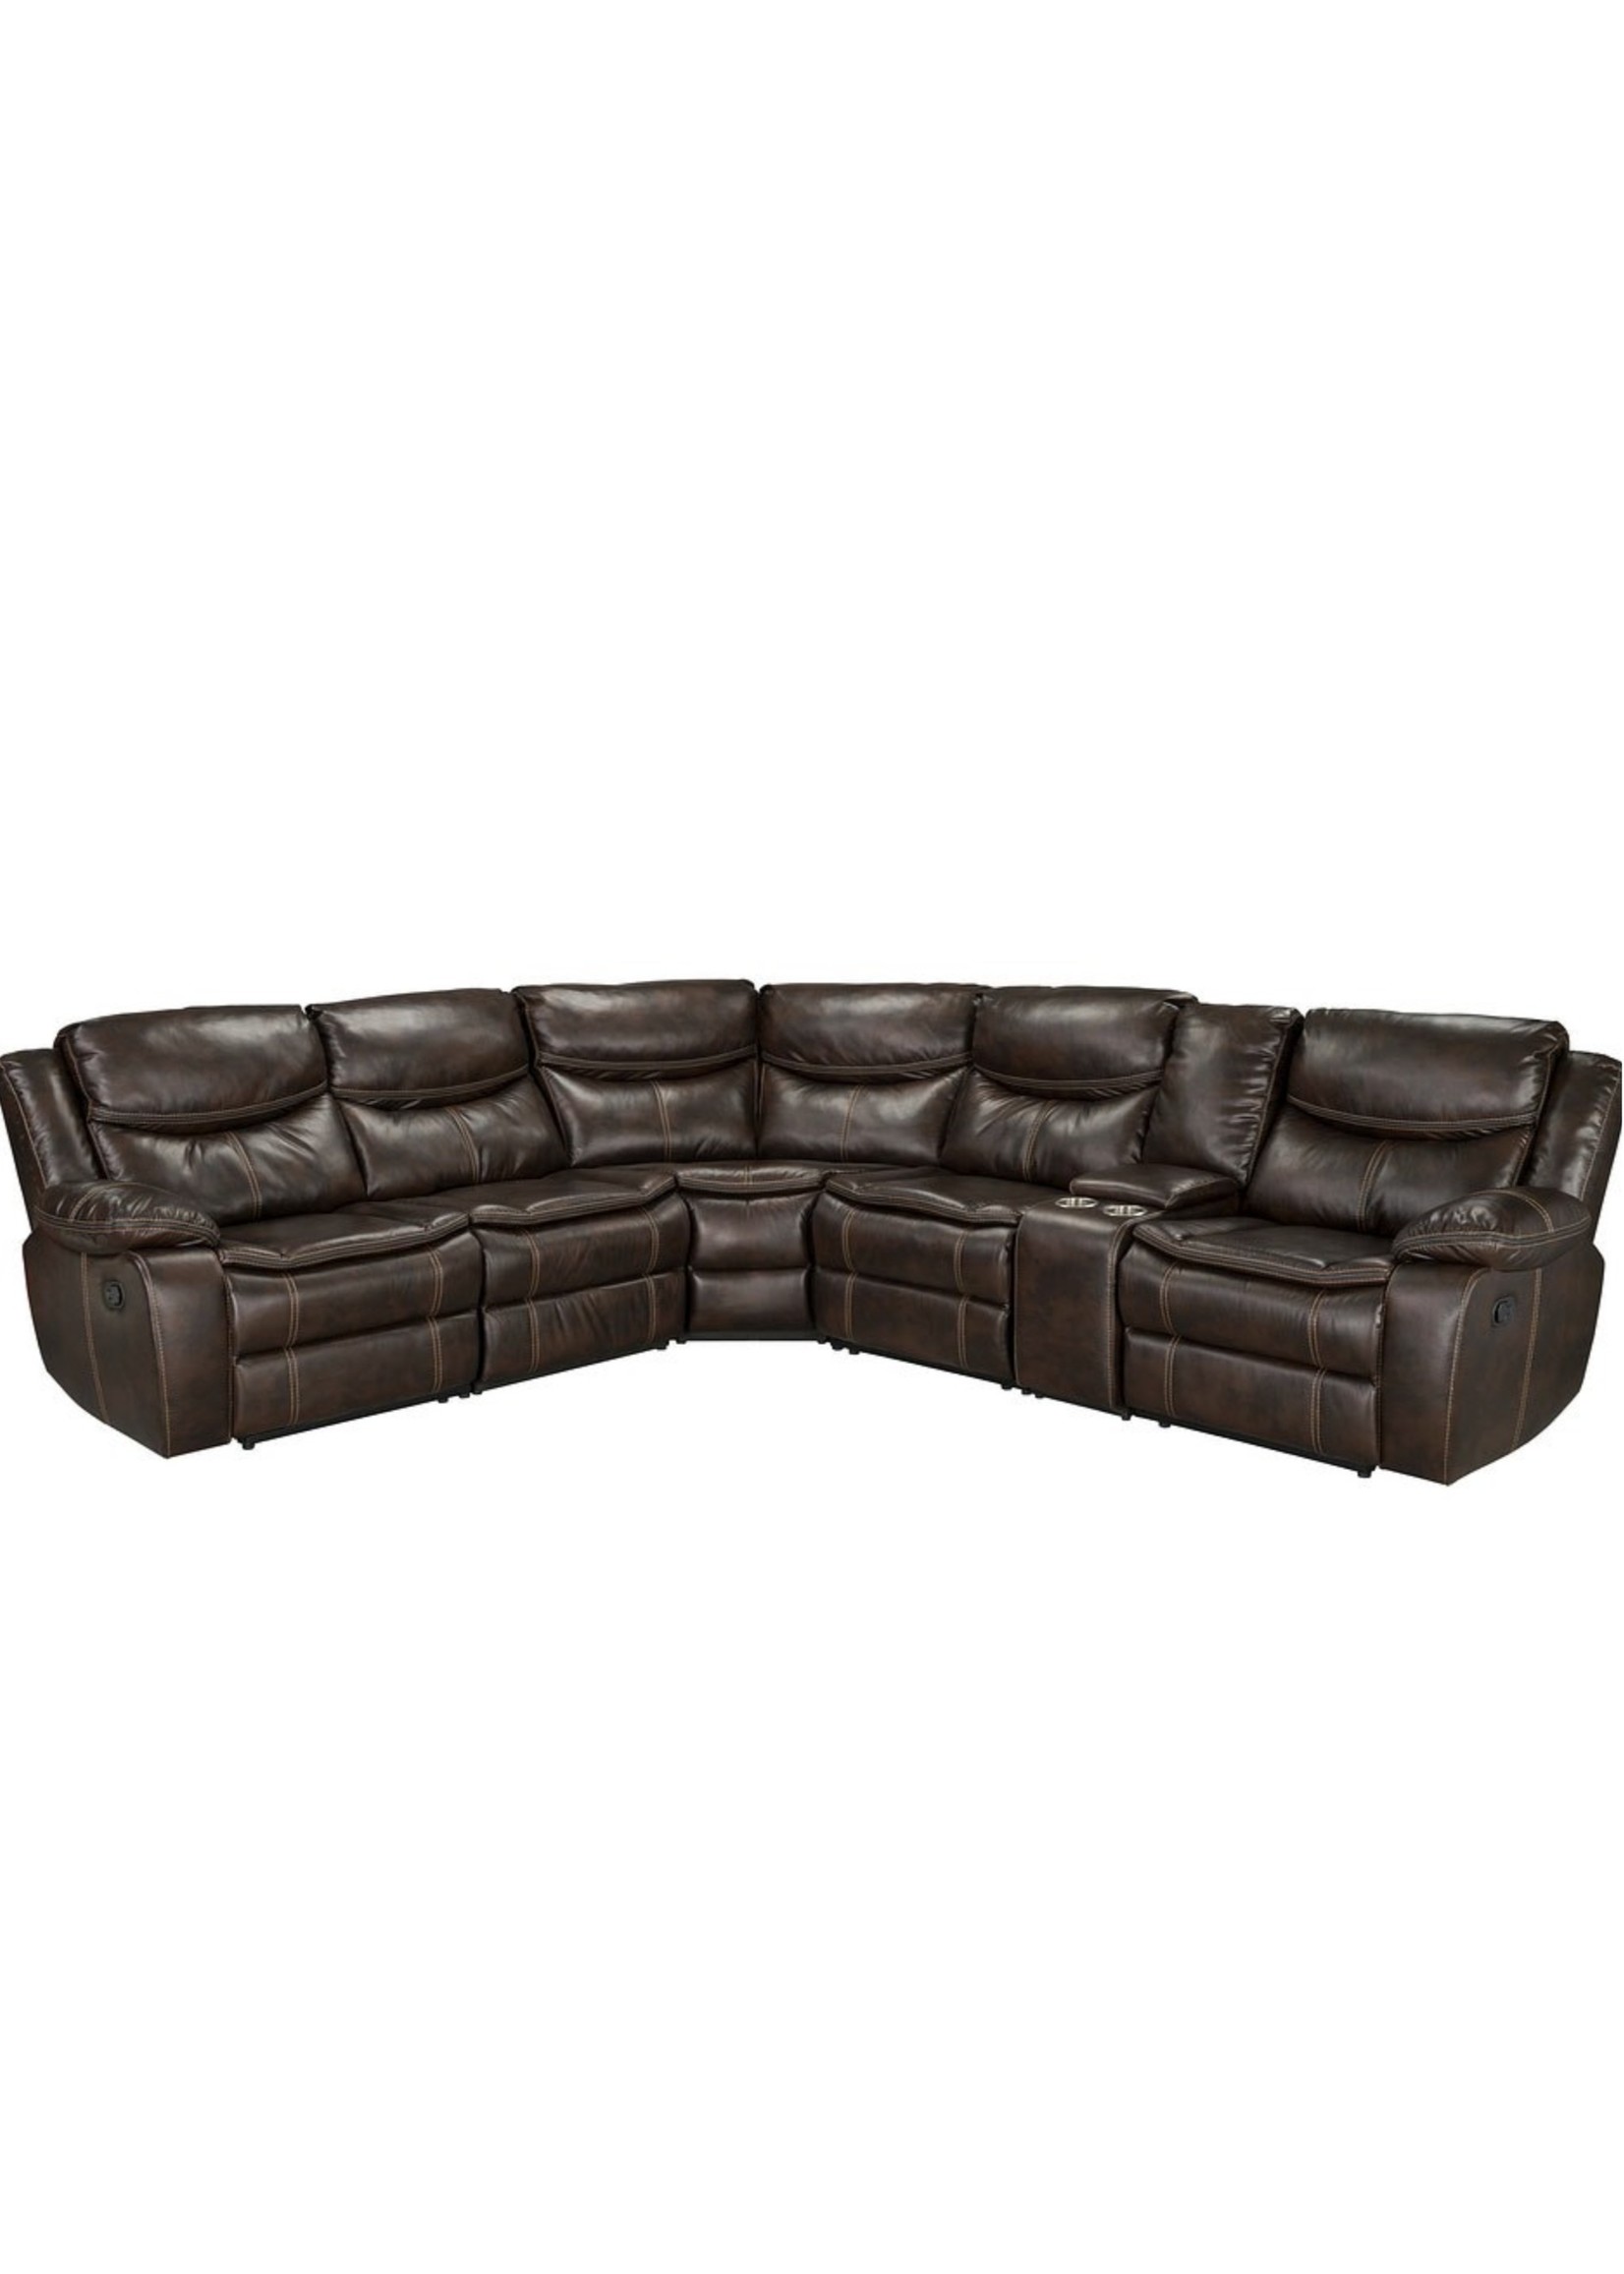 4253011/21/31/41/101 6 PIECE SECTIONAL HOLLINGSWORTH CHOCOLATE